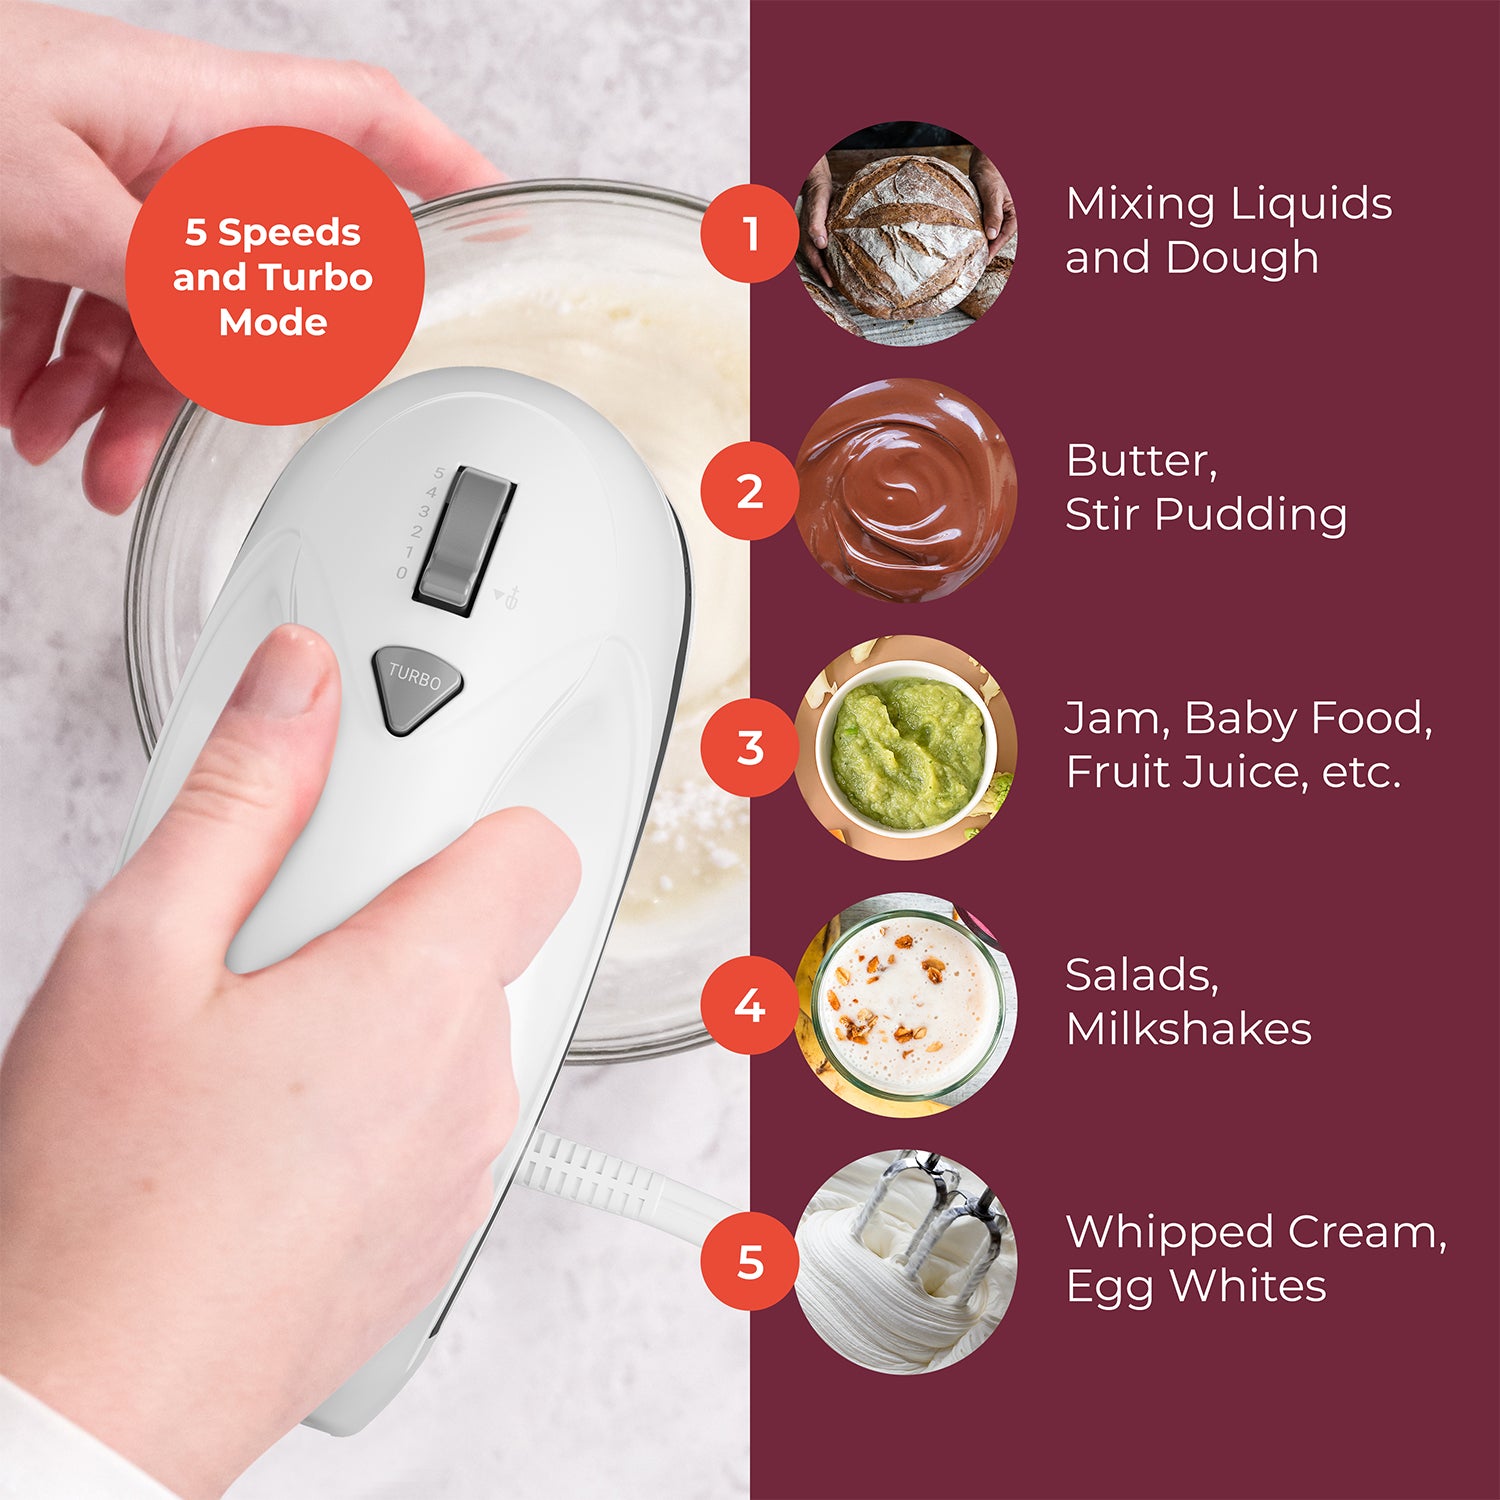 Hand Mixer Electric, UTALENT 180W Multi-speed Hand Mixer with Turbo Button,  Easy Eject Button and 5 Attachments (Beaters, Dough Hooks, and Whisk)